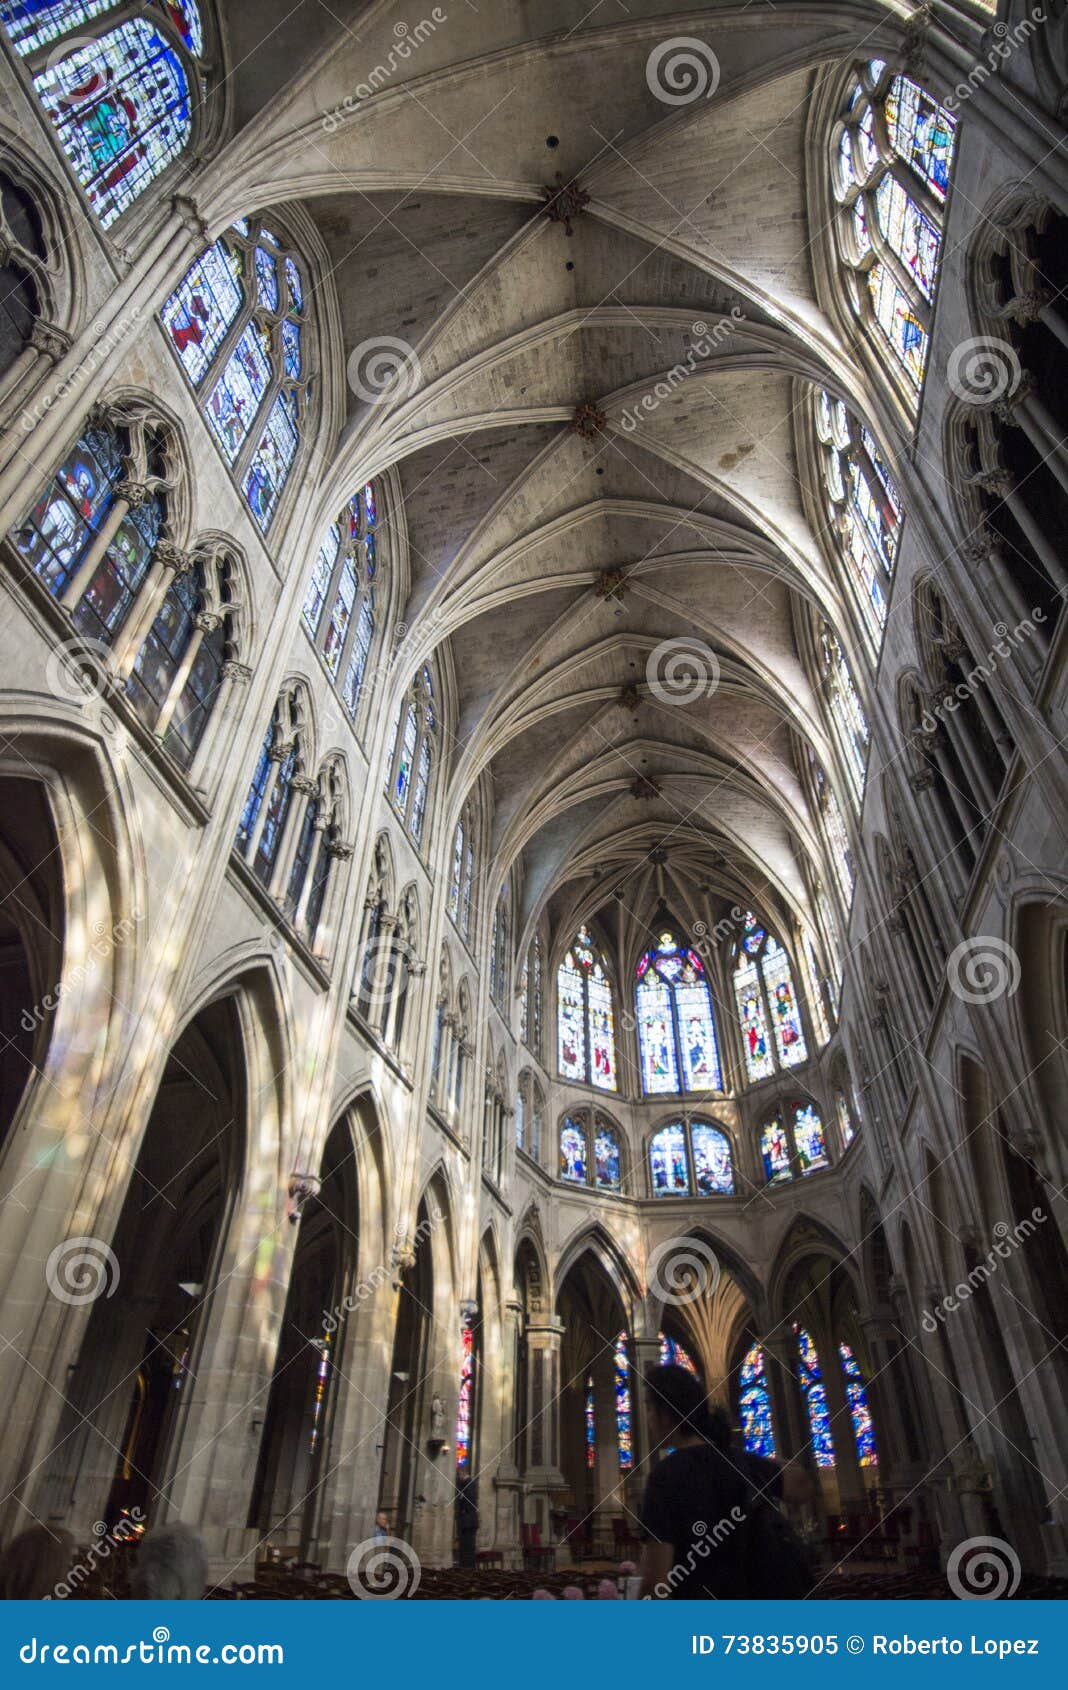 Ceiling And Windows Of Notre Dame Cathedral Editorial Image